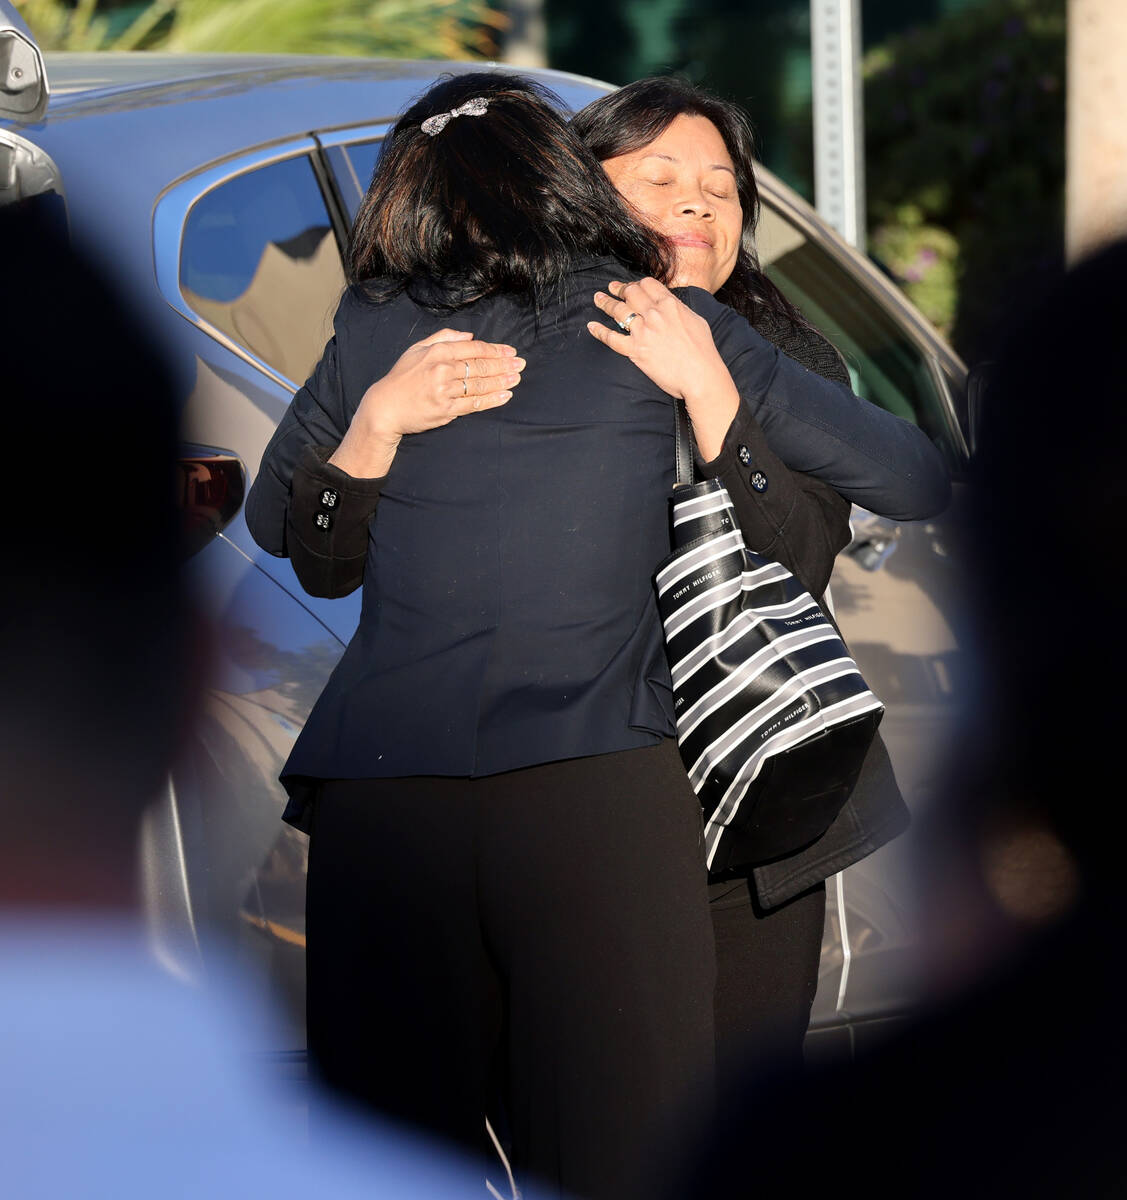 Mourners arrive during public visitation for fallen Las Vegas police officer Truong Thai at Kin ...